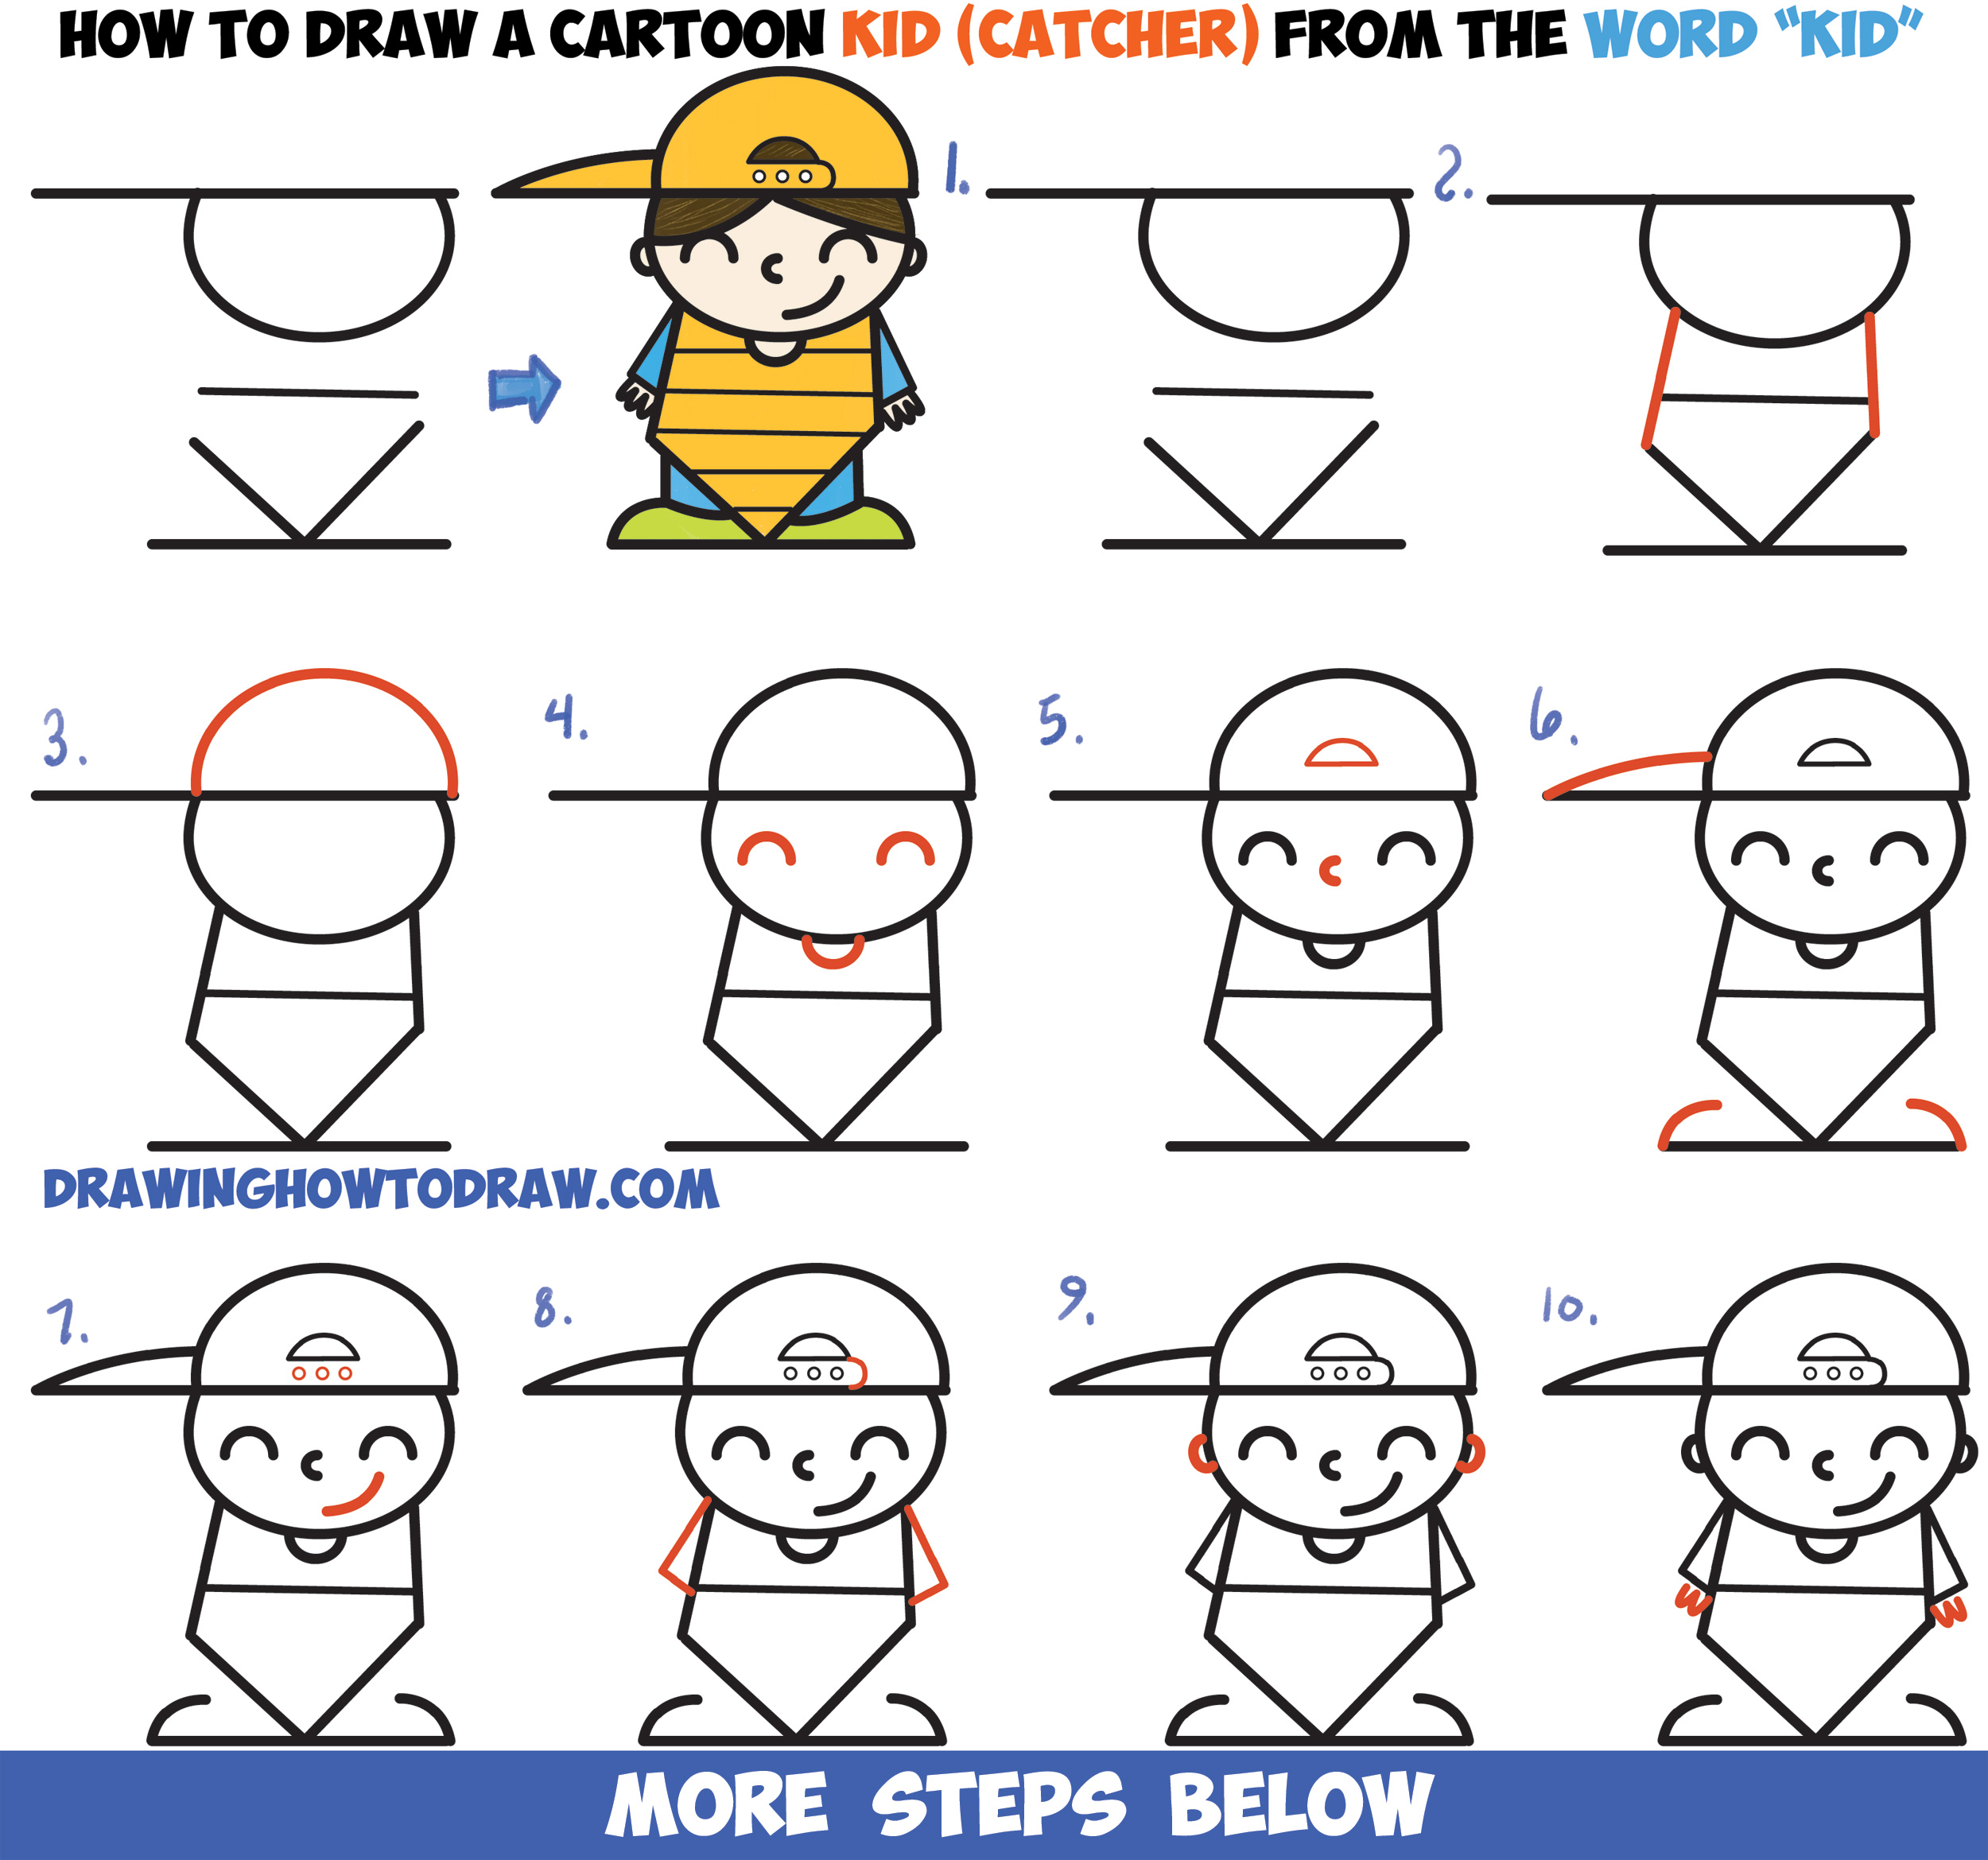 Learn How to Draw a Cute Cartoon Kid Baseball Catcher Word Cartoon Easy Step by Step Drawing Tutorial for Kids